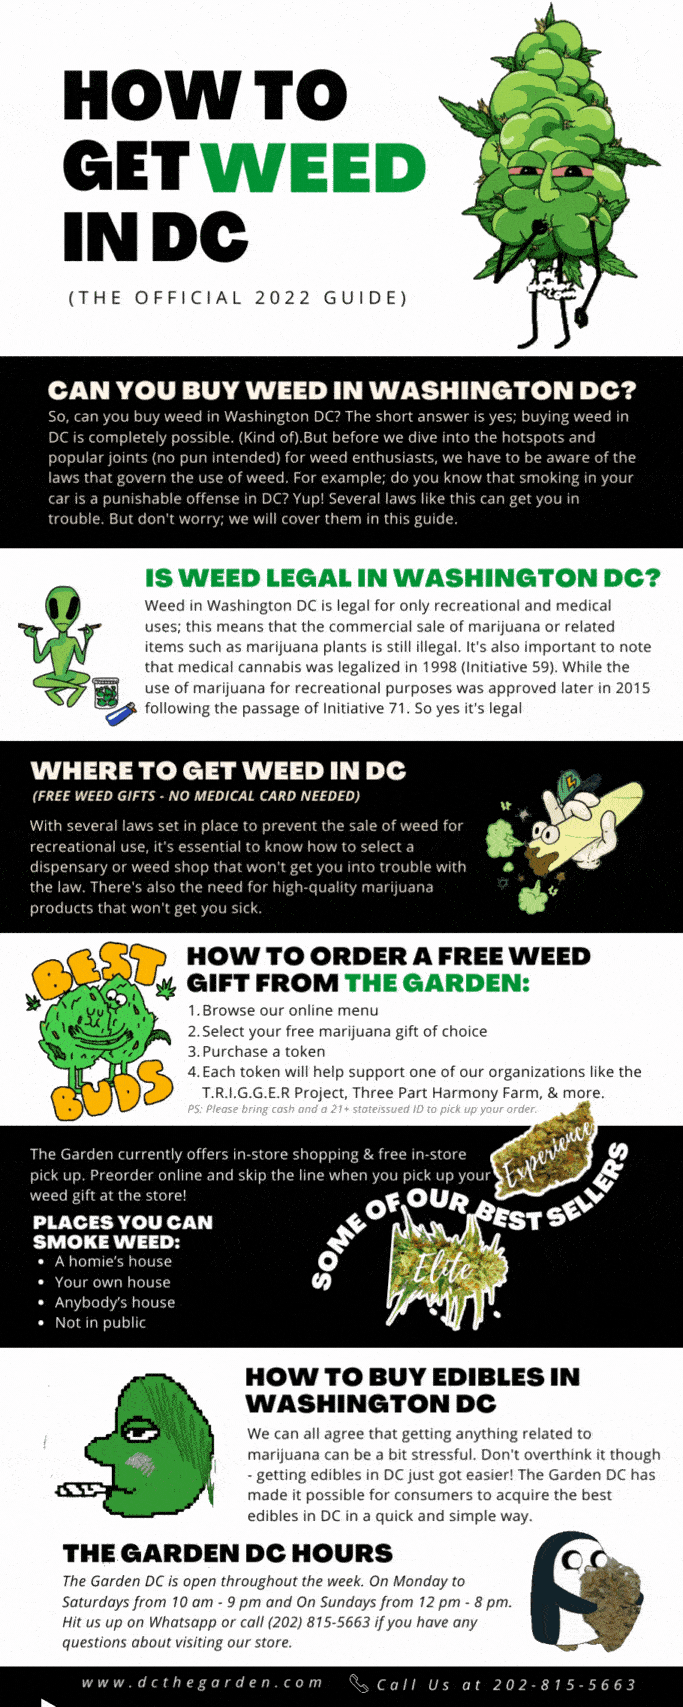 How to Get Weed in DC Infographic